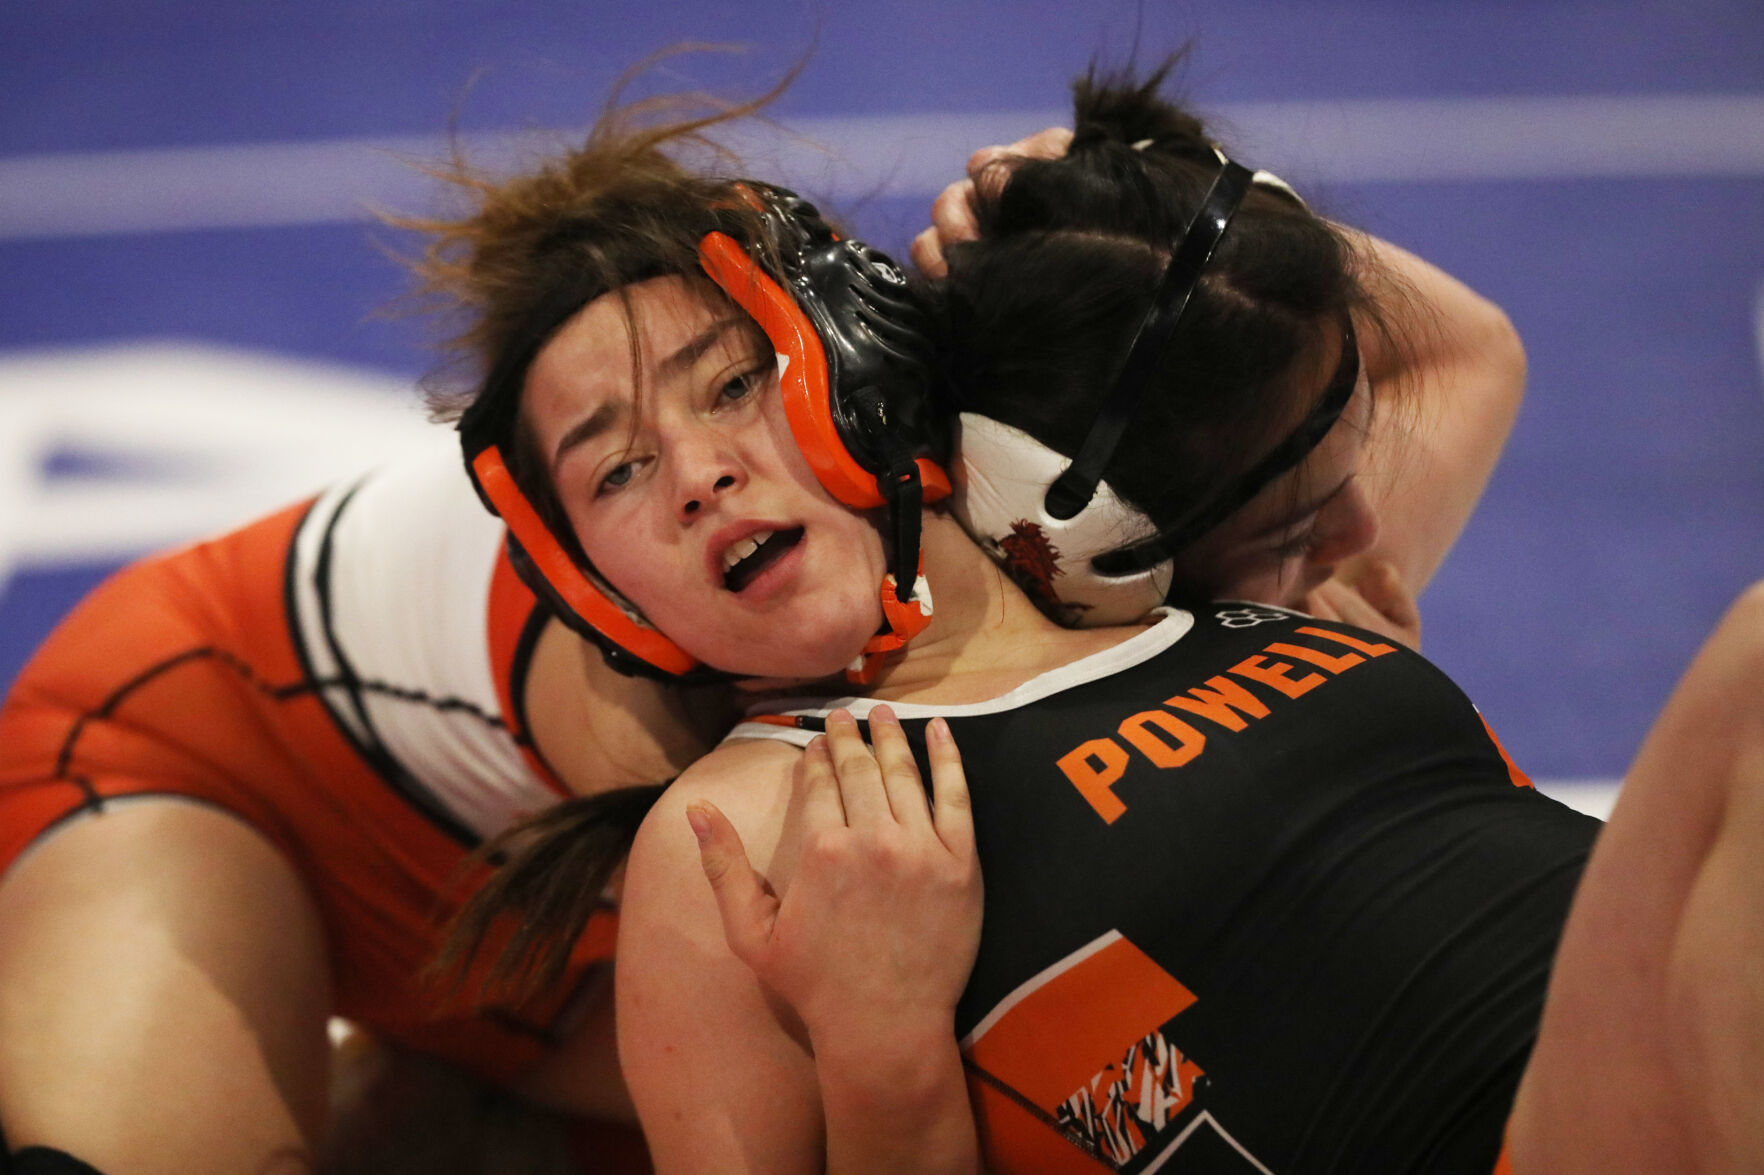 By any measure, girls wrestling is off to a gold medal start in Wyoming